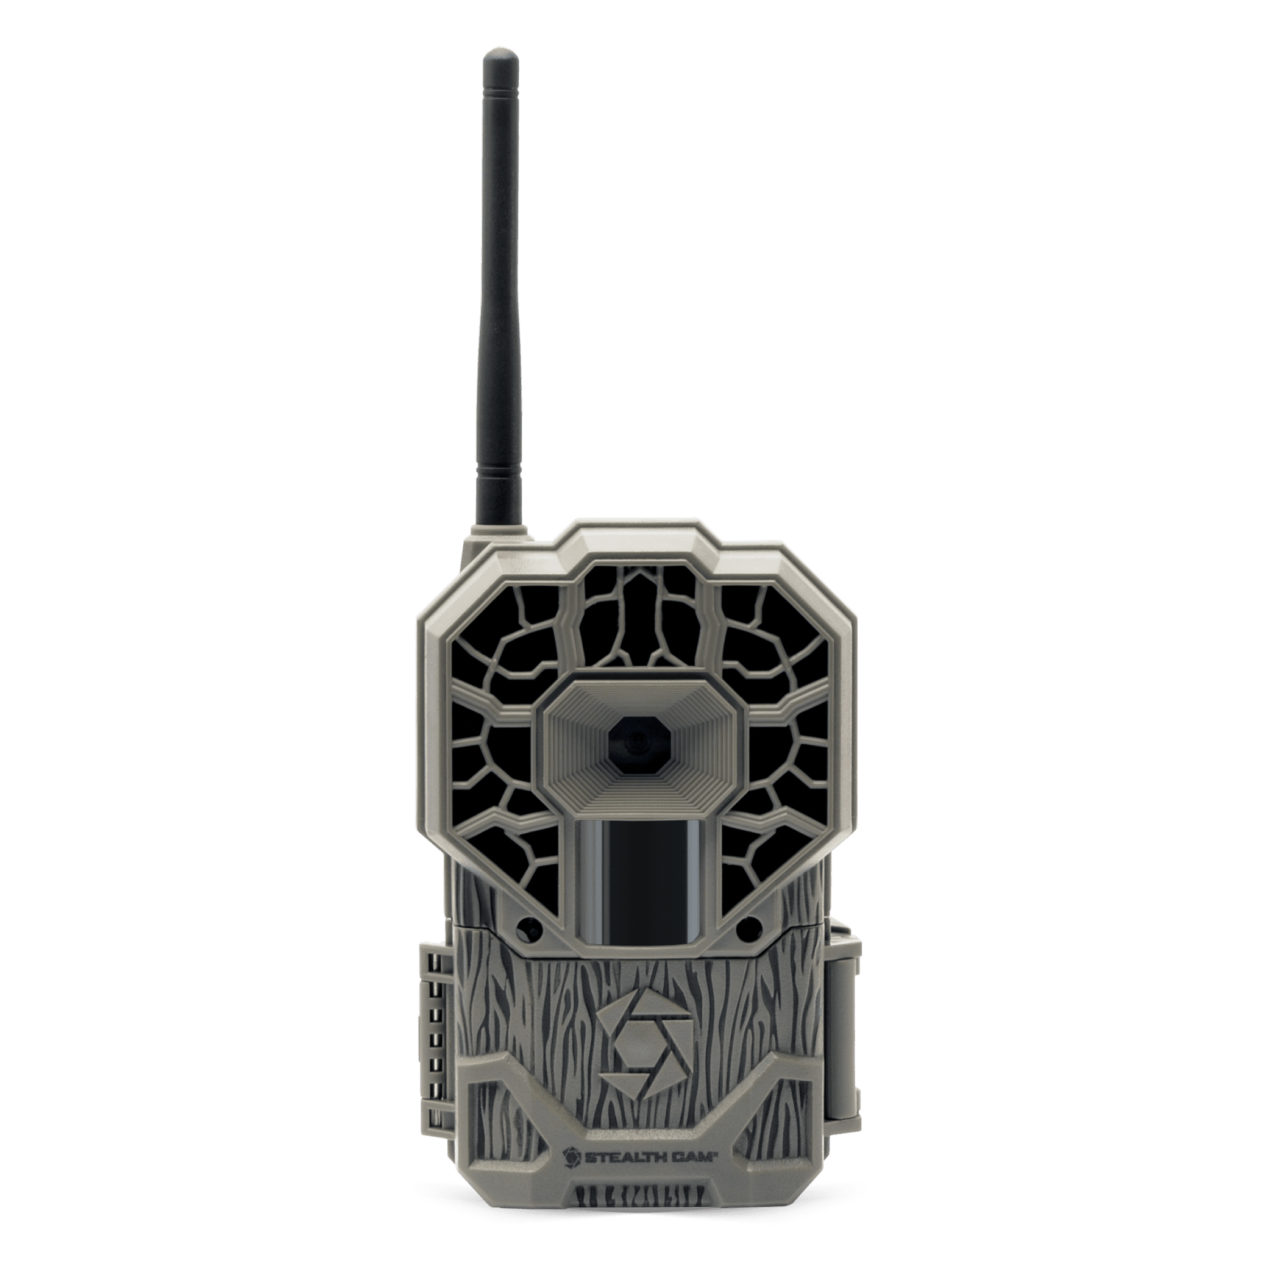 Stealth Cam® WX Wireless Remote Cams Deliver Real-Time/All-Time Access